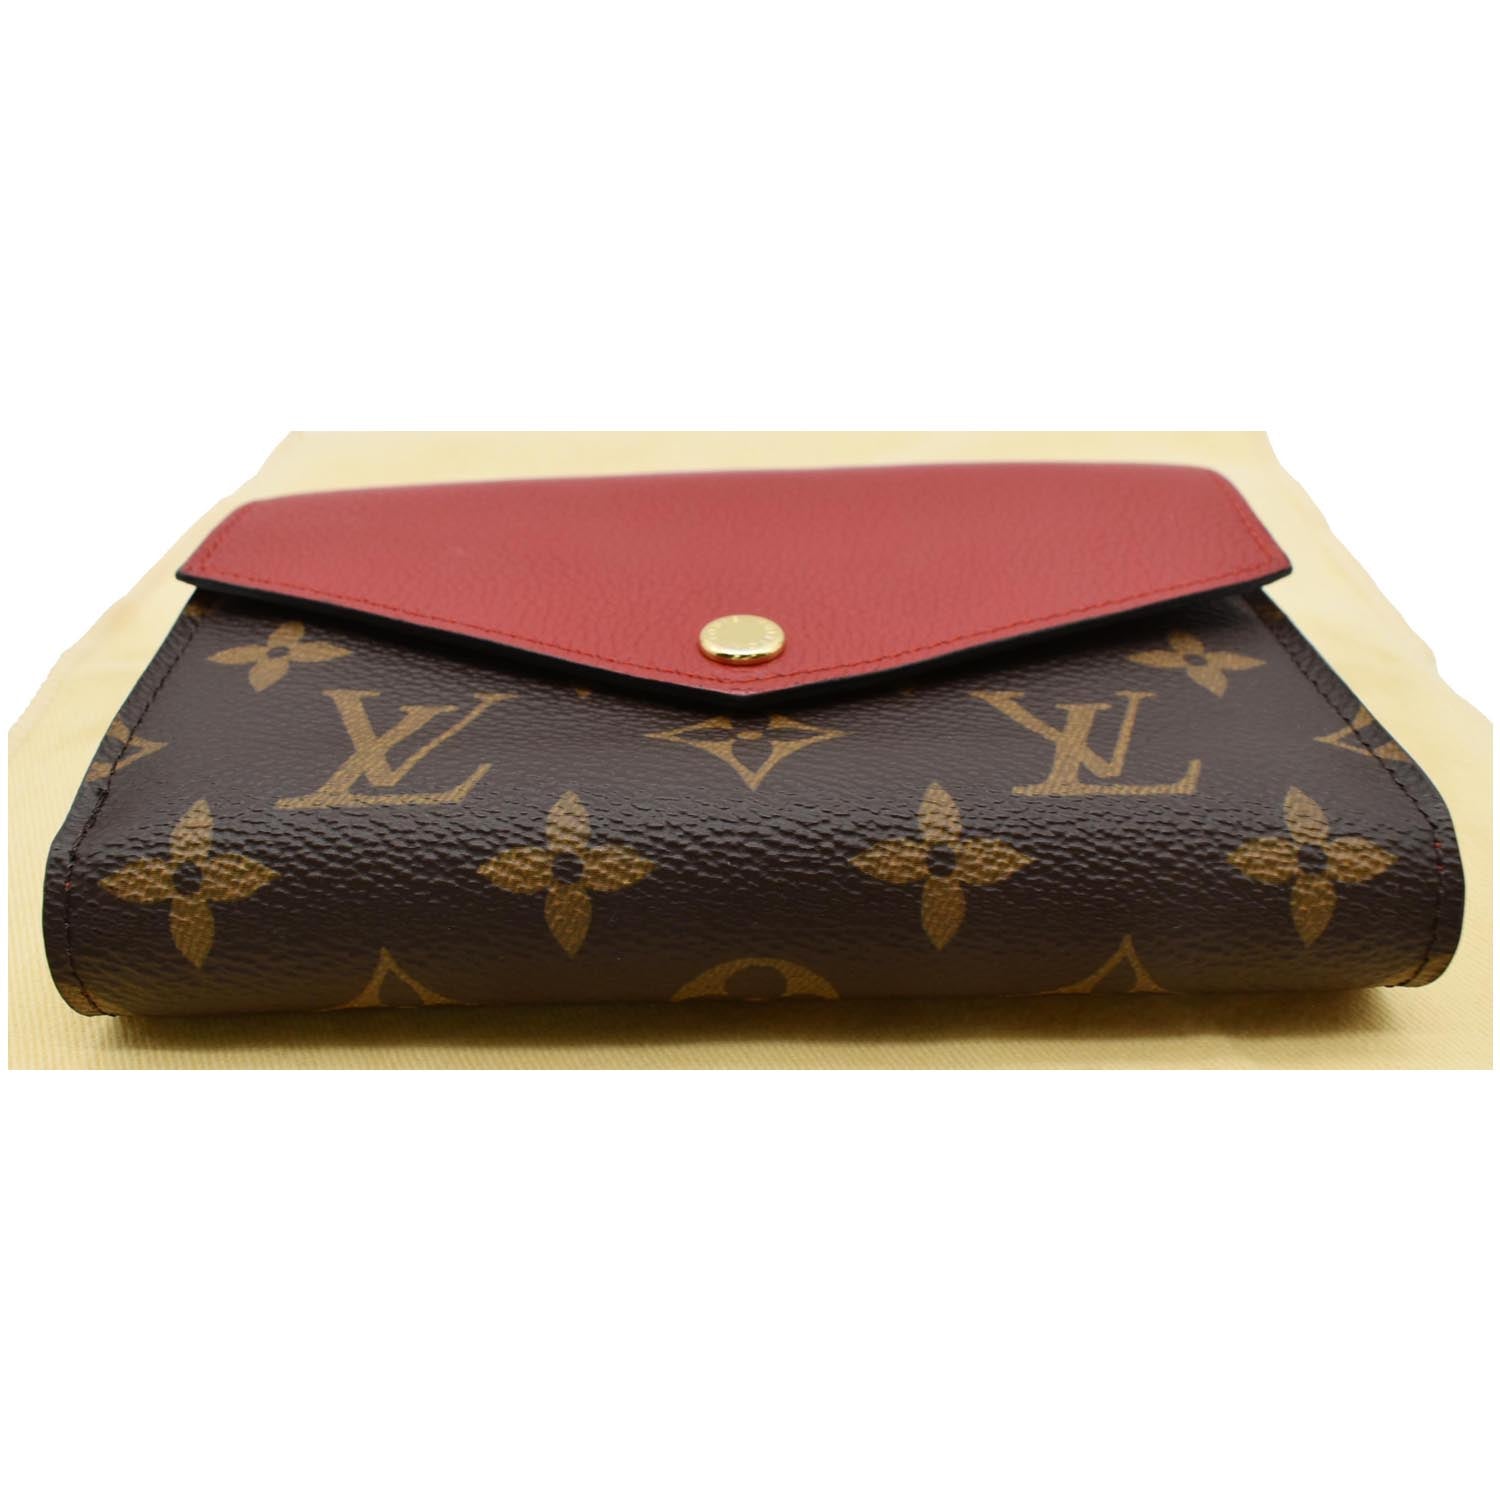 Louis Vuitton Monogram Compact Pallas Wallet with Red Cerise - A